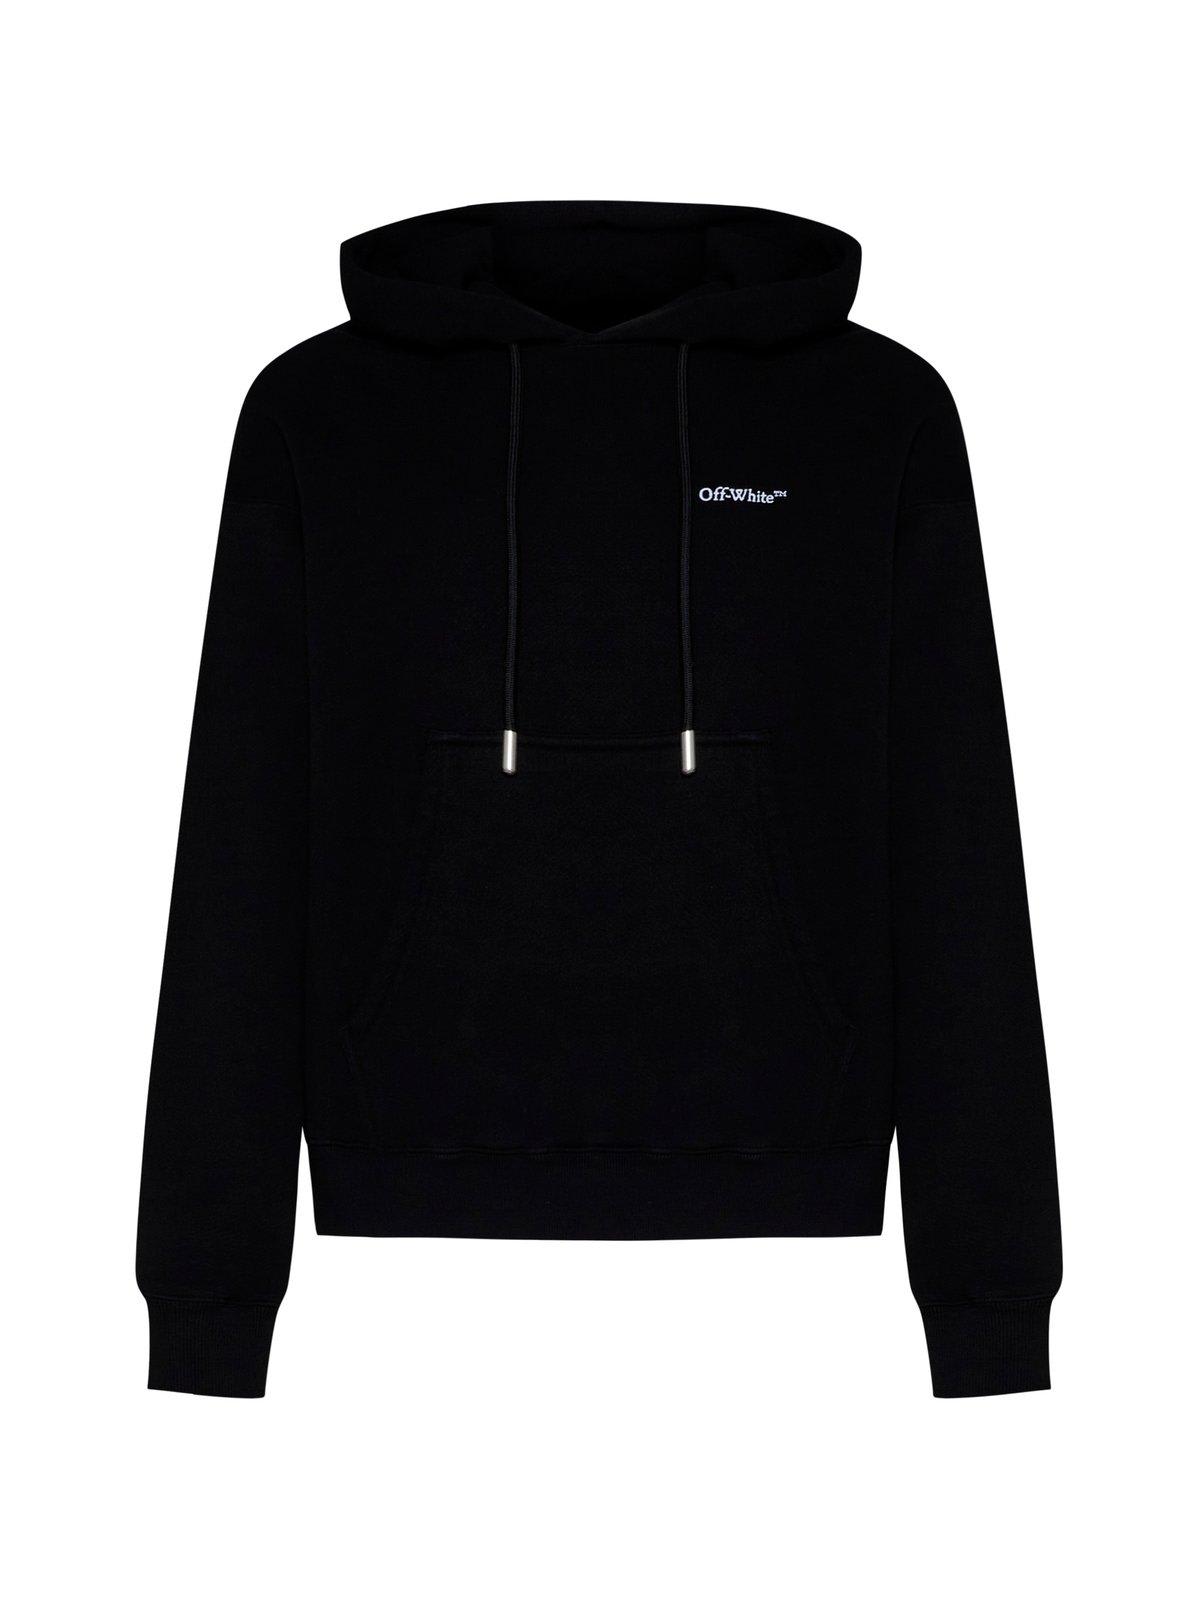 OFF-WHITE LOGO EMBROIDERED DRAWSTRING HOODIE